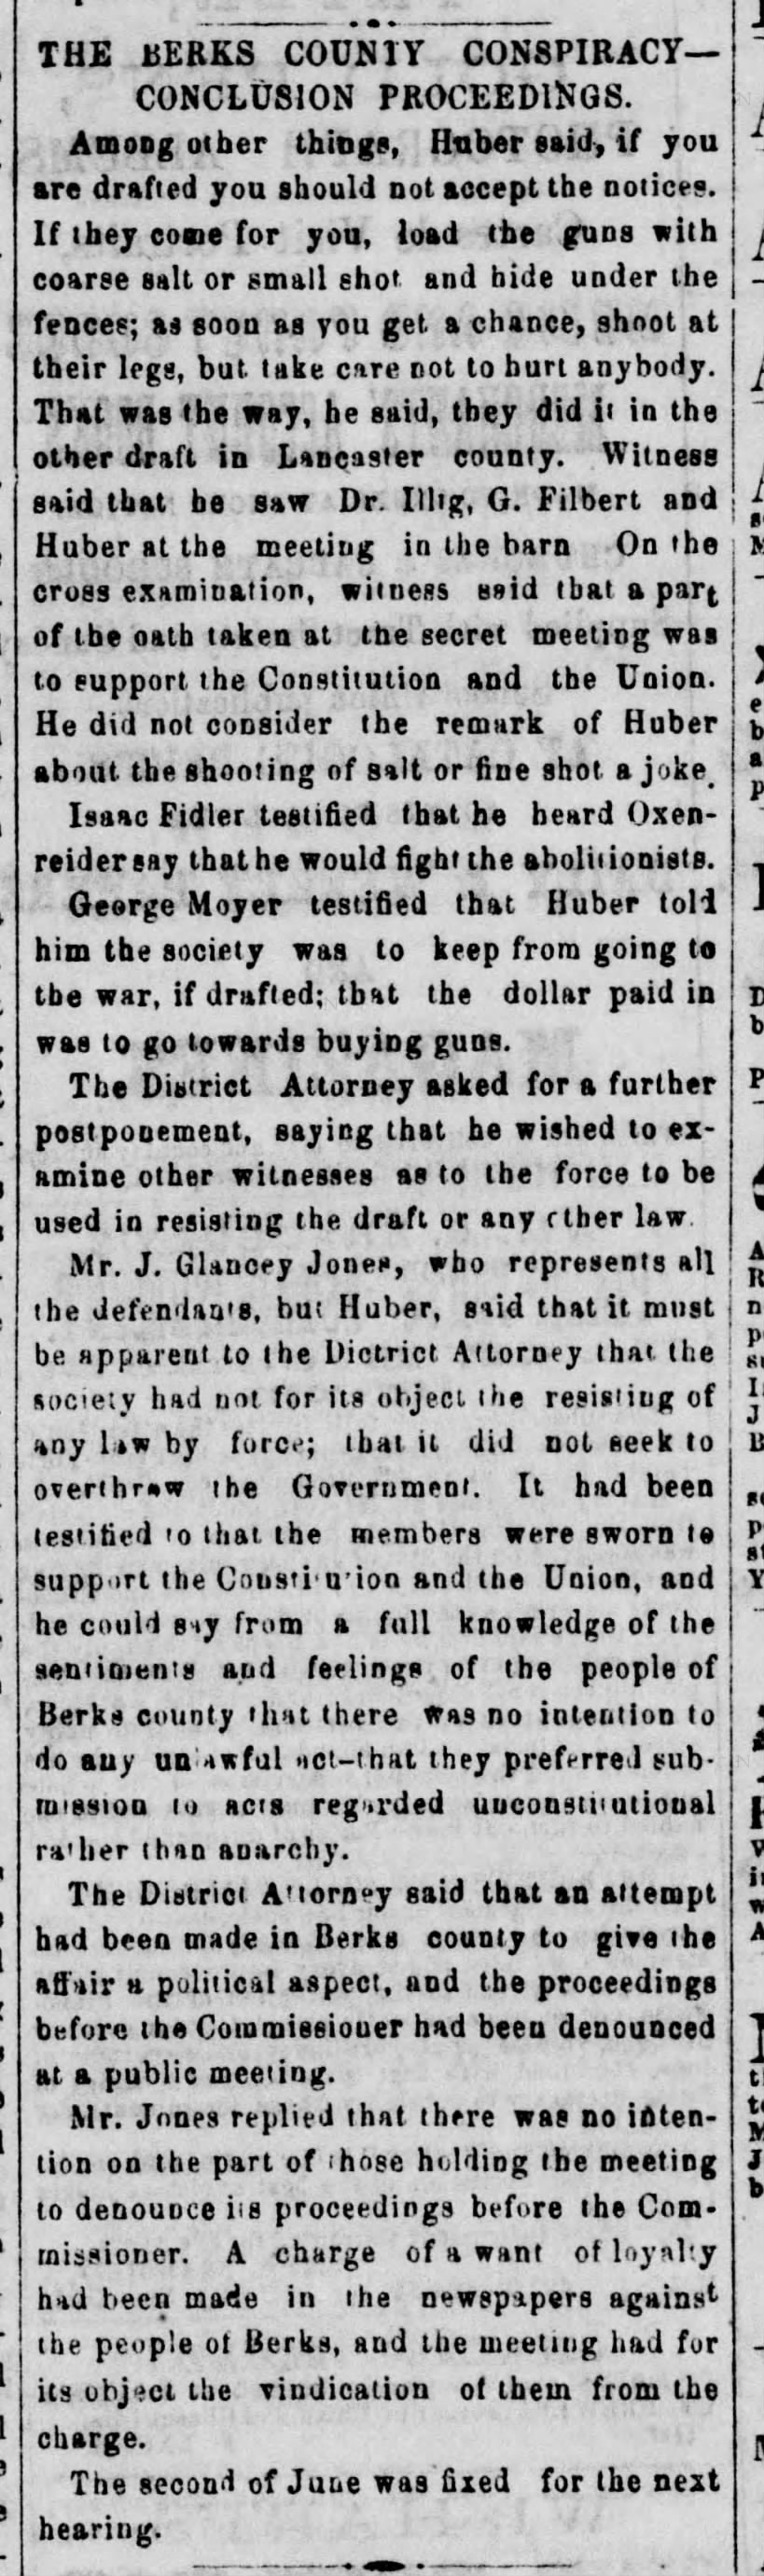 1863-05-09 - George Moyer Testifies - Reading Times p 3 Col 2 -